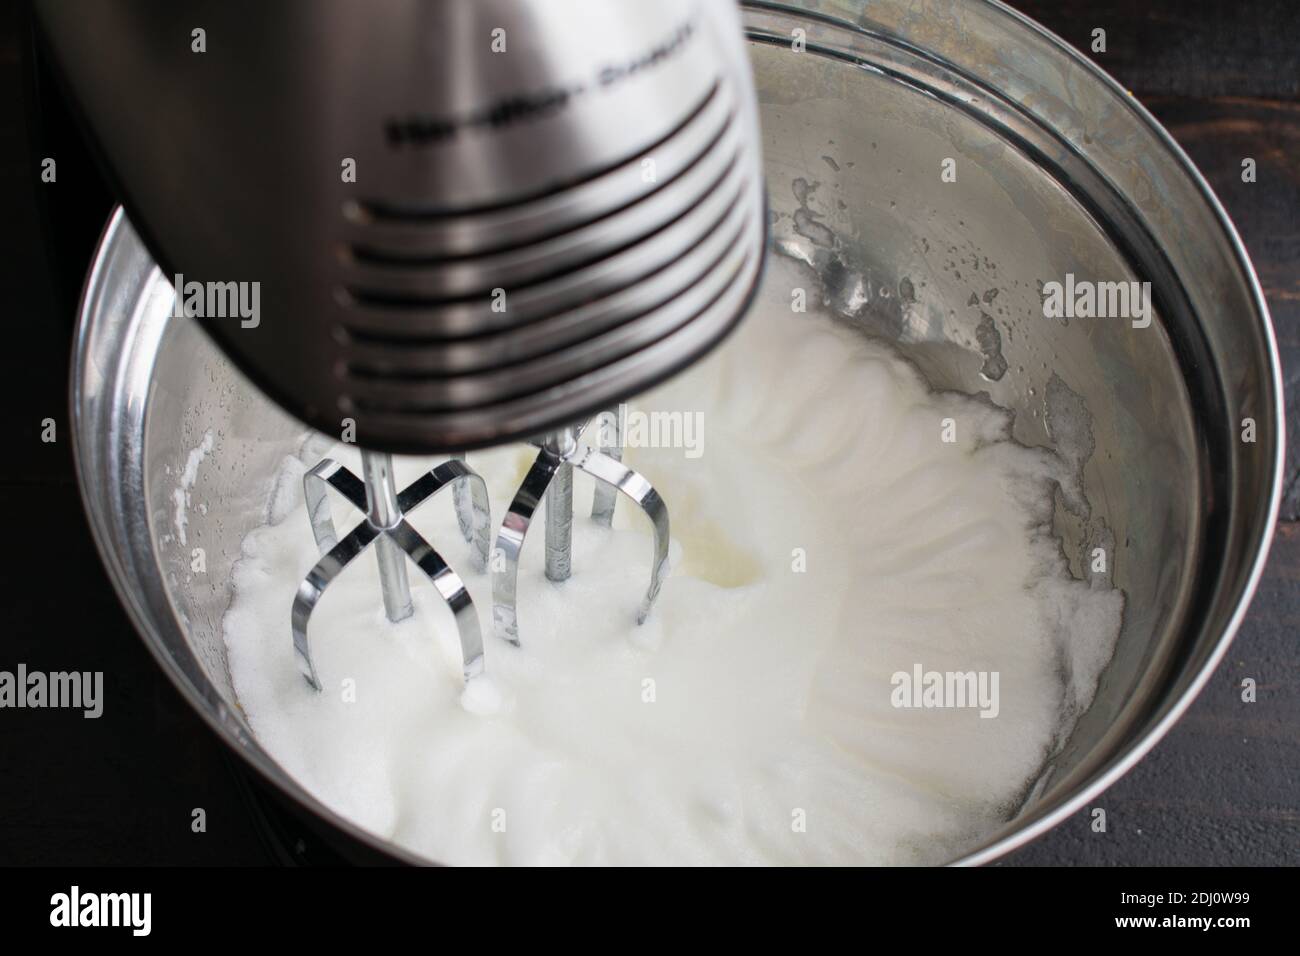 Beating Egg Whites to Make Meringue: Egg whites that have been beaten in a stand mixer until they are fluffy Stock Photo